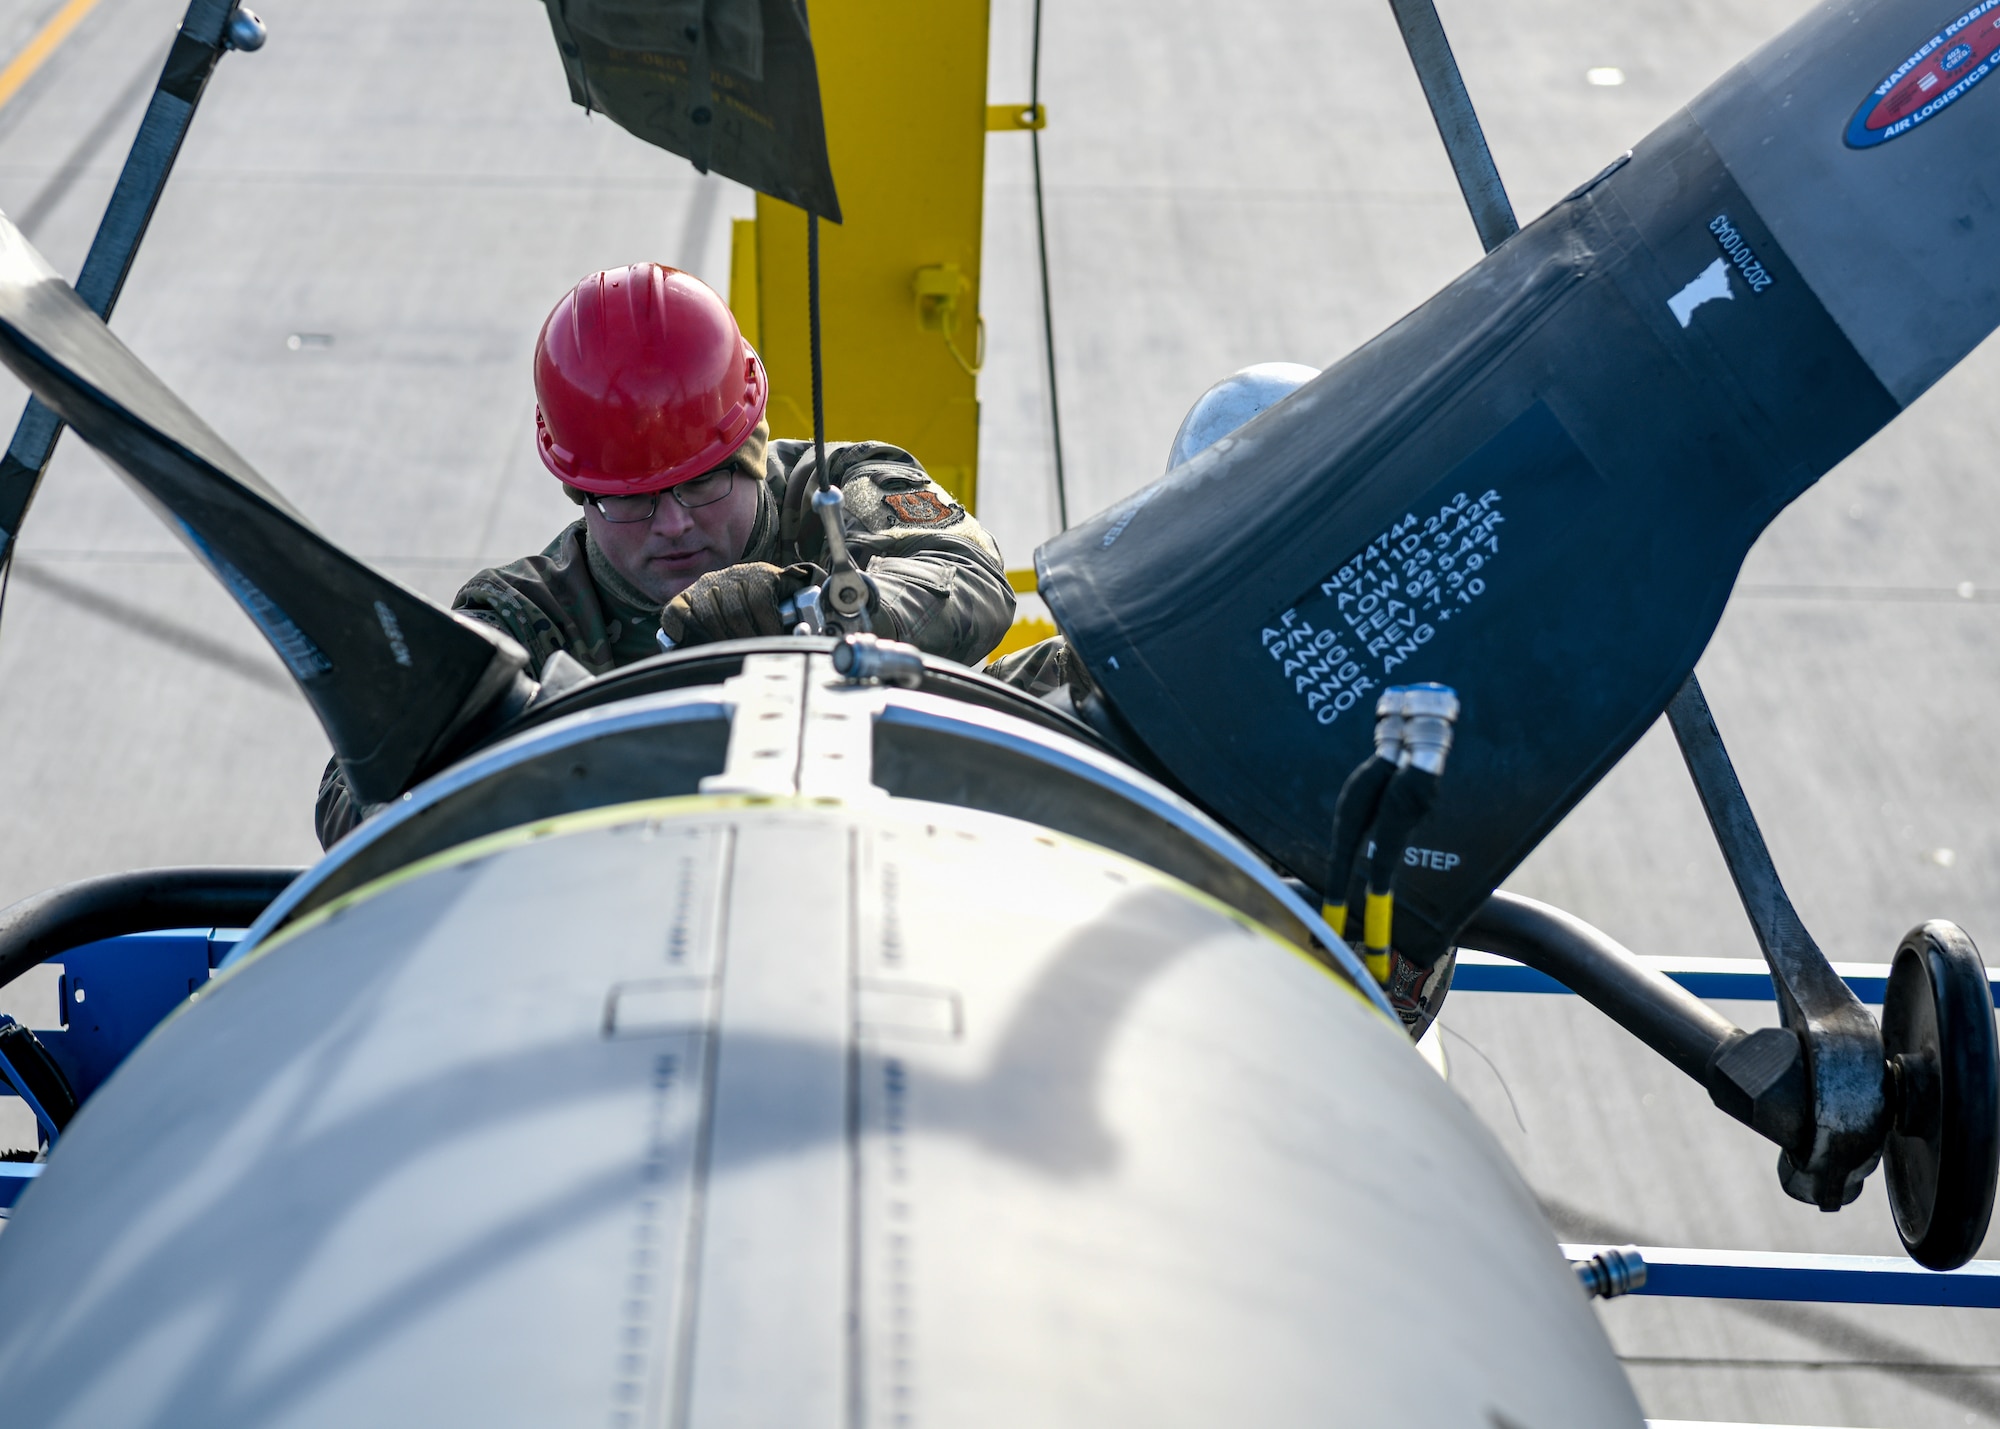 Tech. Sgt. William Wright, an aerospace propulsion technician with the 910th Aircraft Maintenance Squadron, installs a propeller onto a 910th Airlift Wing C-130H Hercules aircraft, Jan. 17, 2023, at Mountain Home Air Force Base, Idaho.